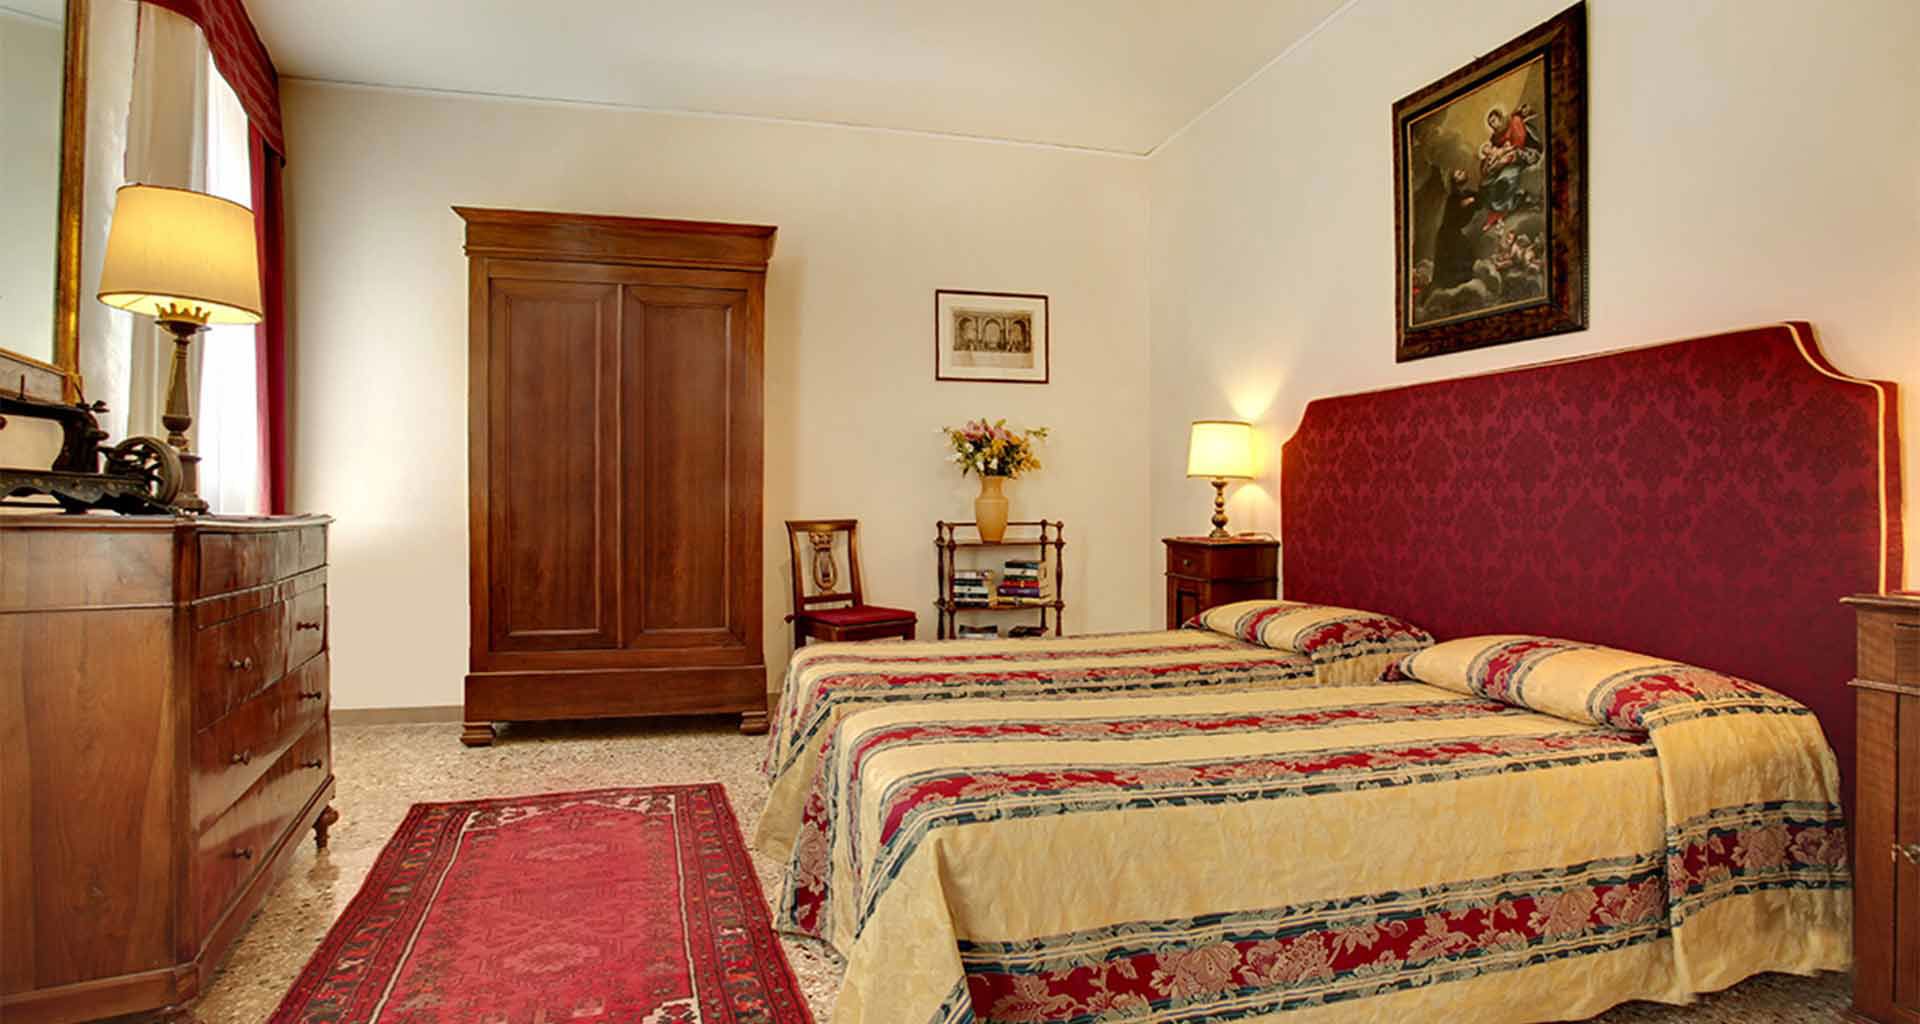 Palazzo Schiavoni - Suite Apartment 2 Rooms and Canal View 1